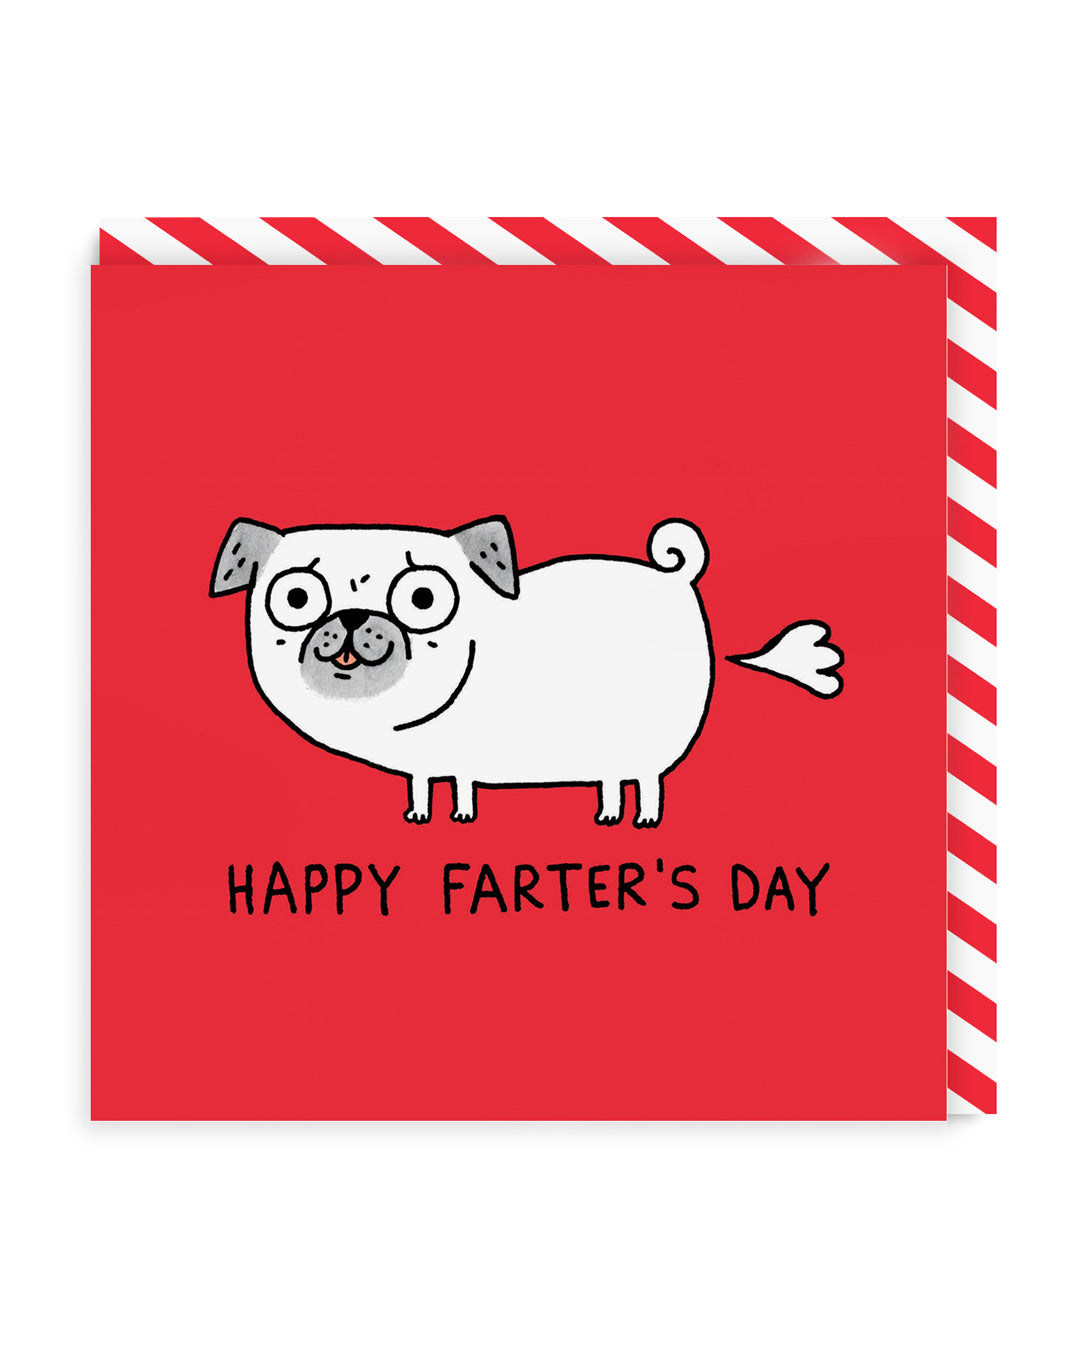 Father’s Day Rude Happy Farters Day Greeting Card